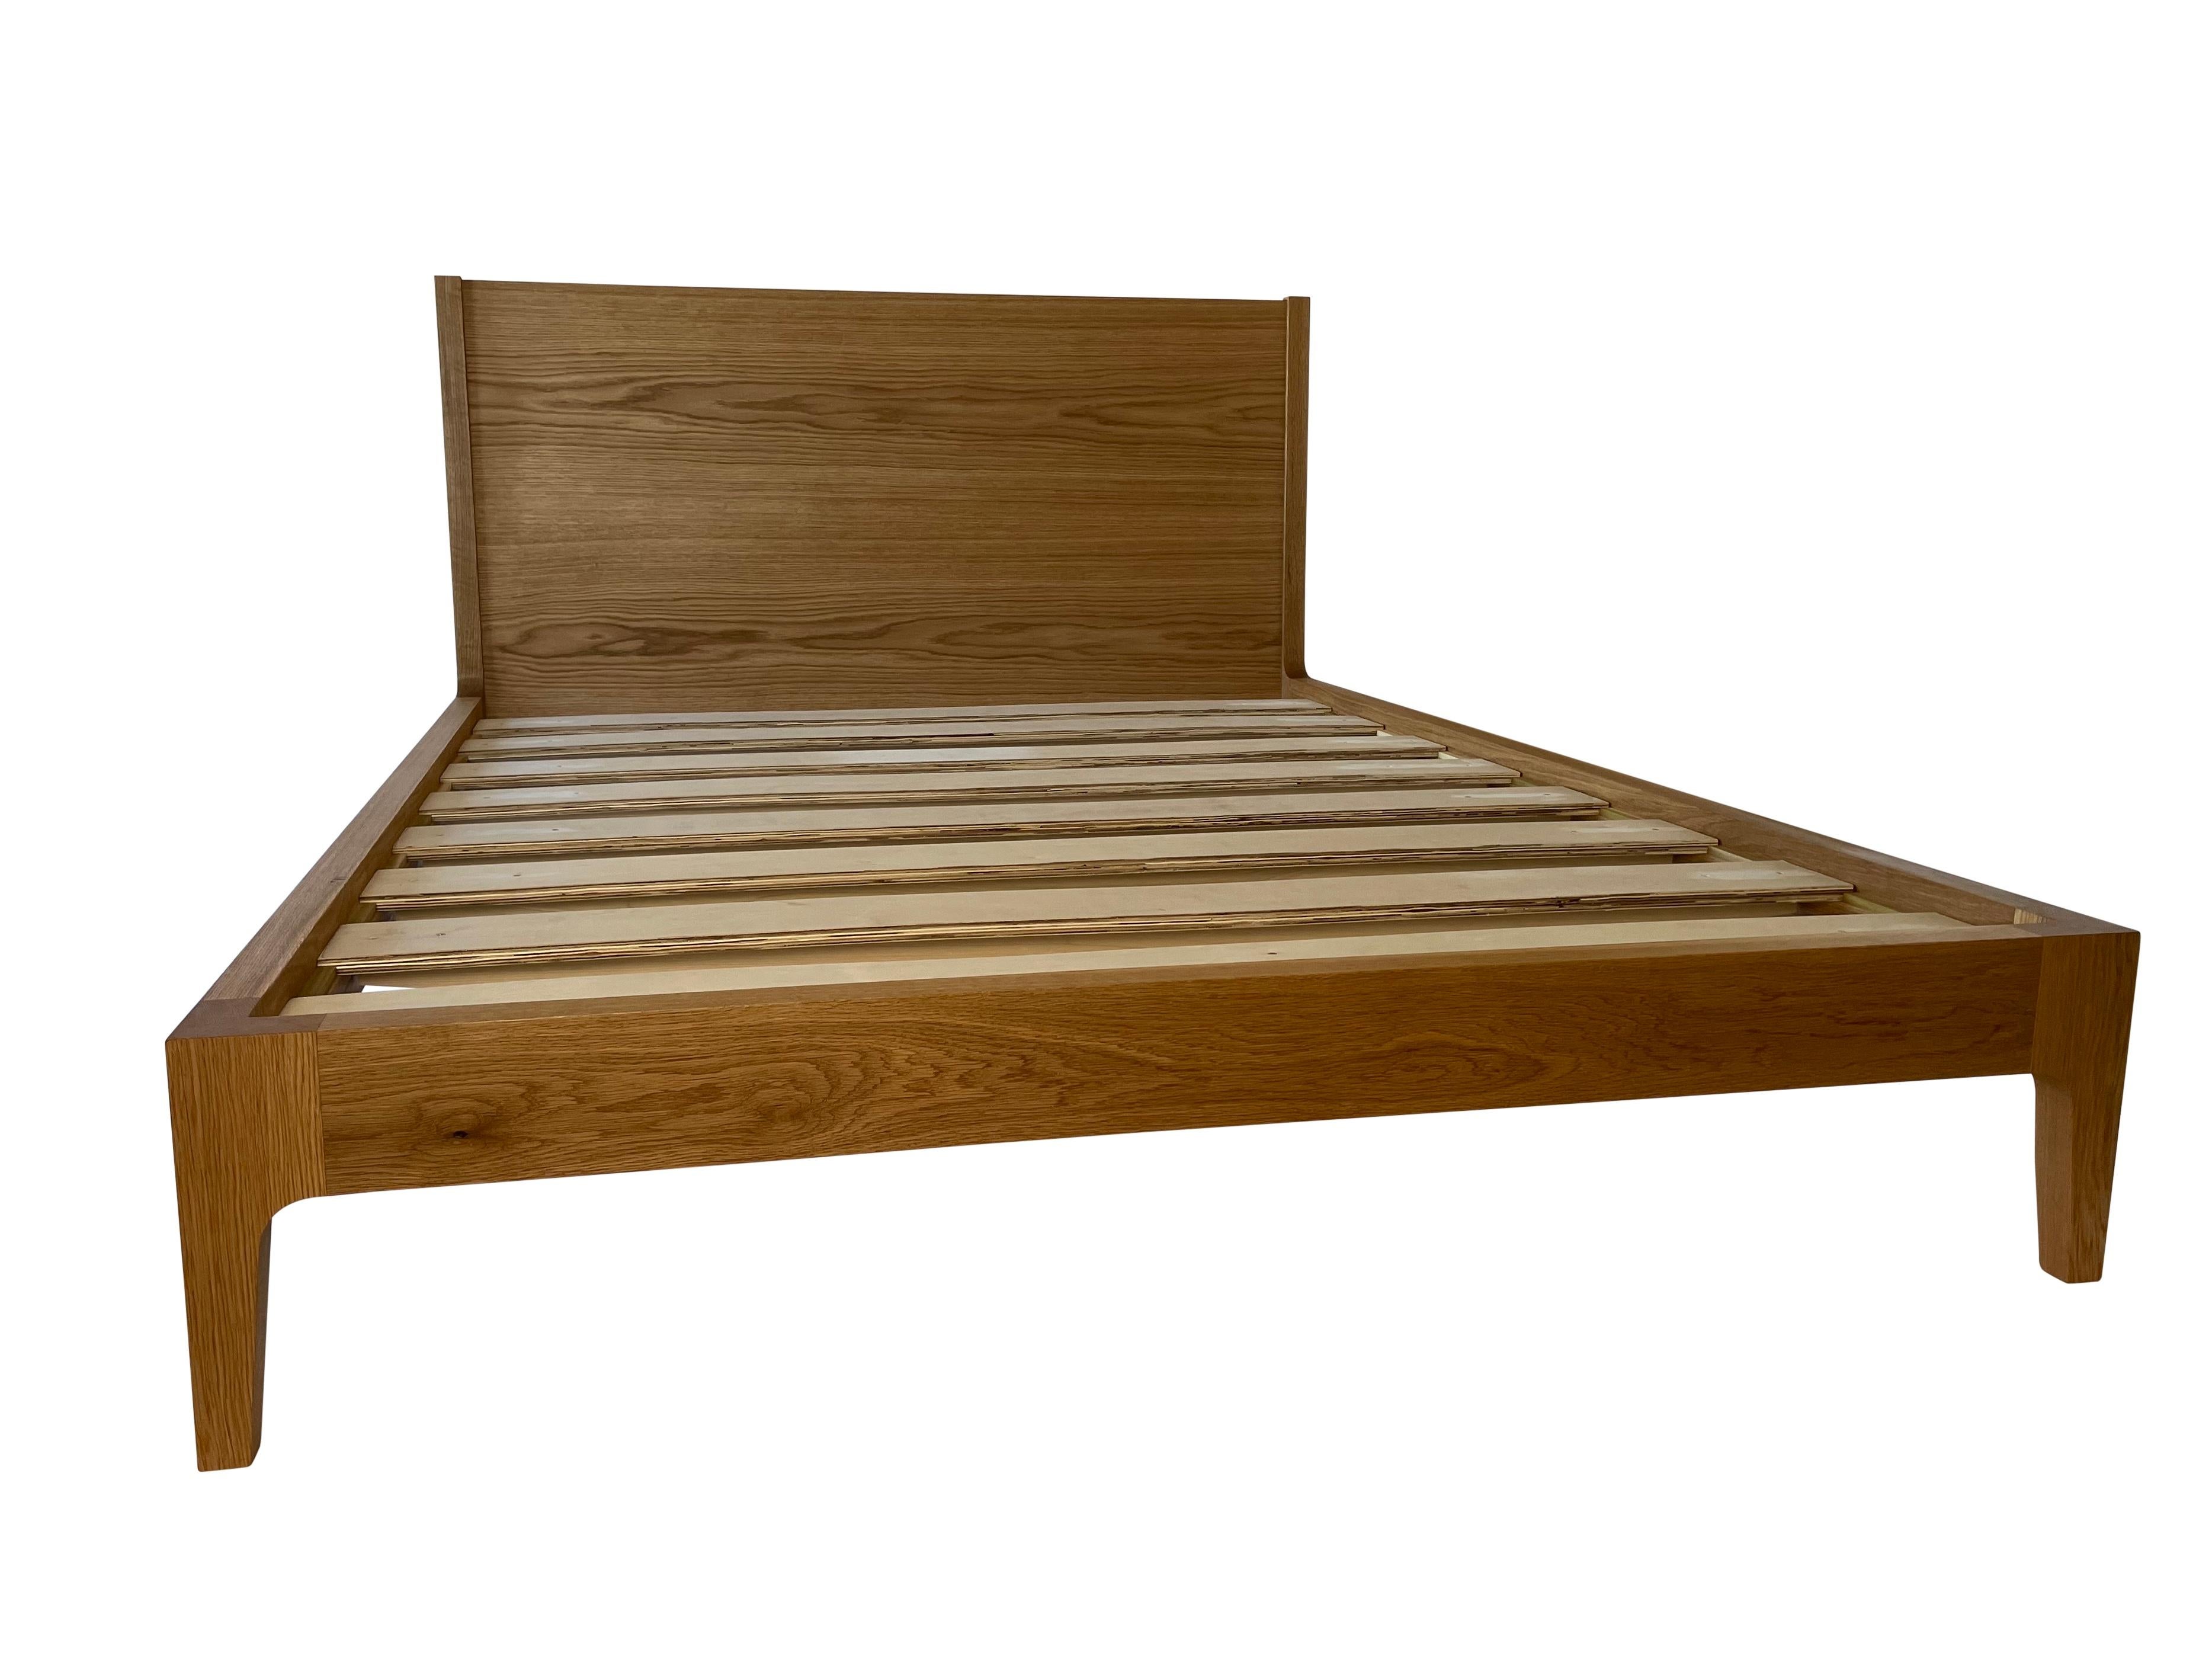 This bed was originally designed for one of our clients who owns a historic home in Santa Fe and wanted something contemporary but also fitting with his adobe home. We designed this bed with its frame constructed from solid 2” thick walnut to pick